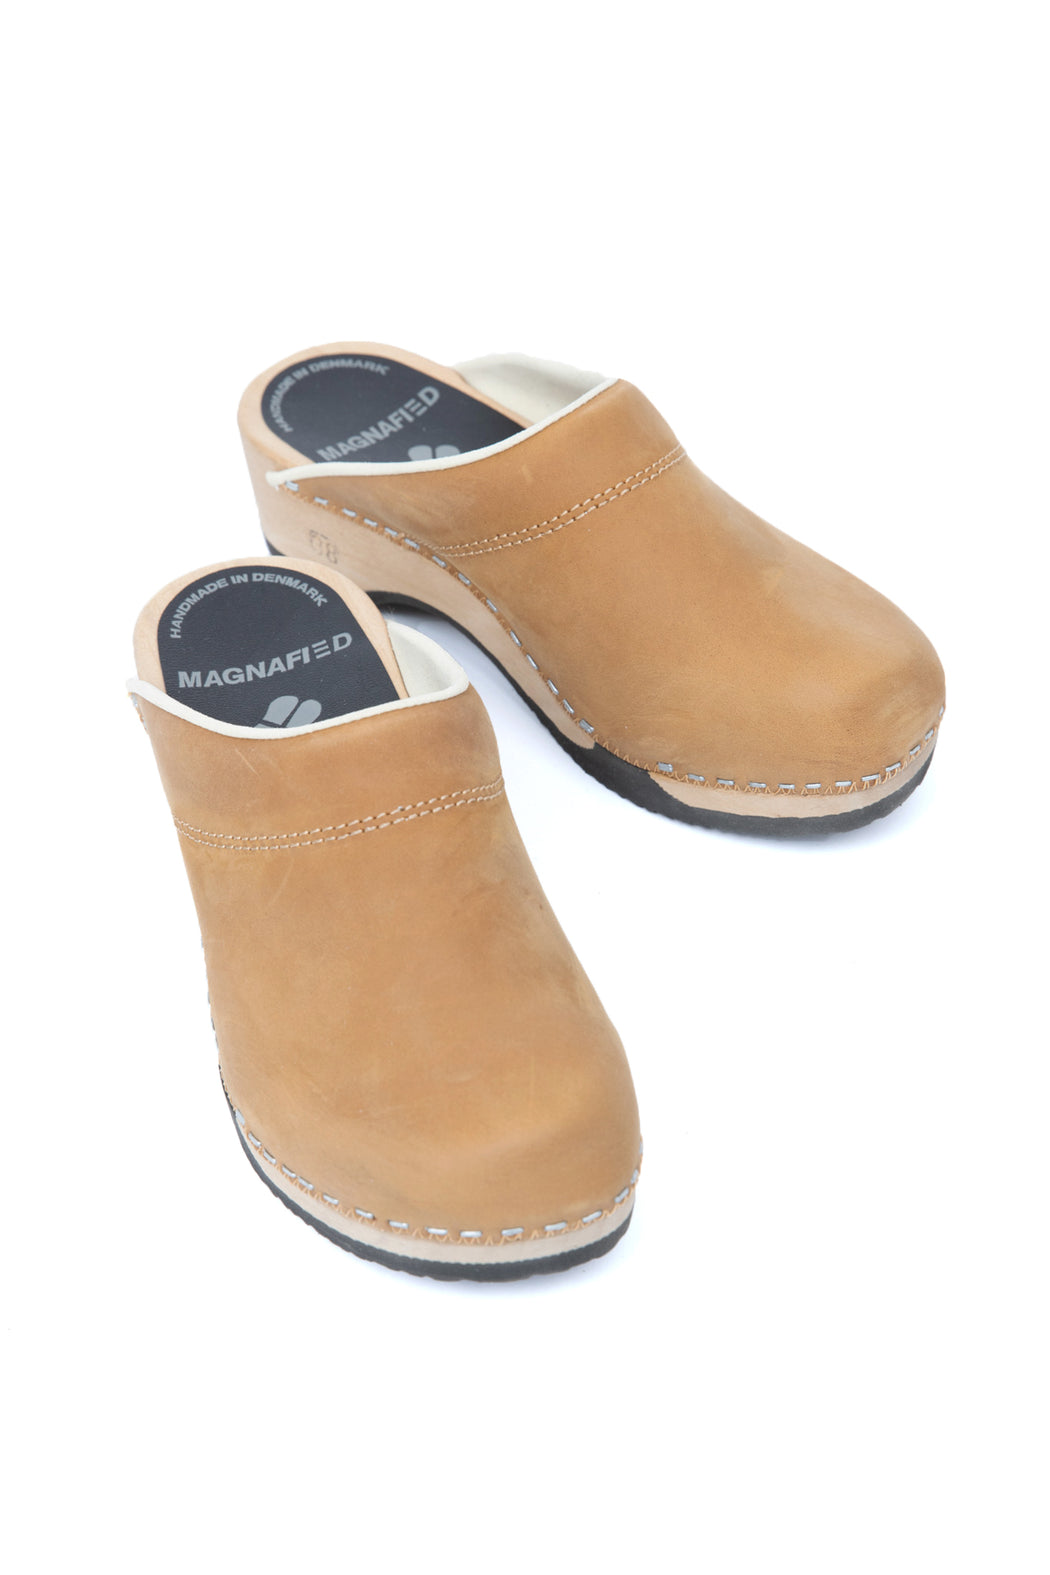 MAGNAFIED-Embla-Clogs-True-Leather-Brown